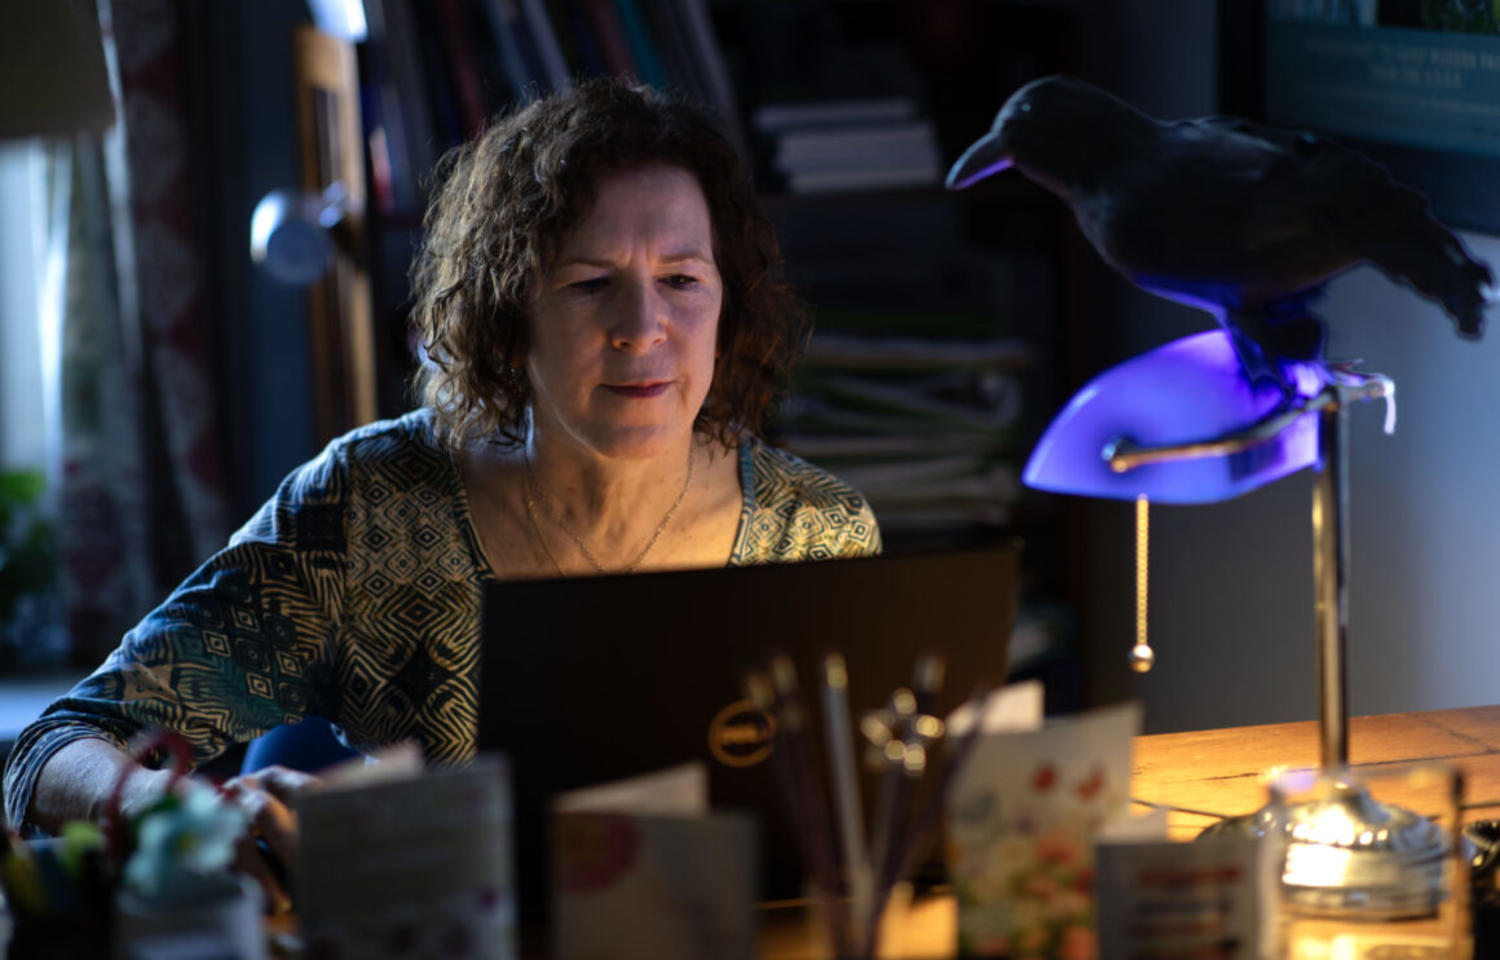 Woman sitting at a desk with a raven perched on top of a lamp.